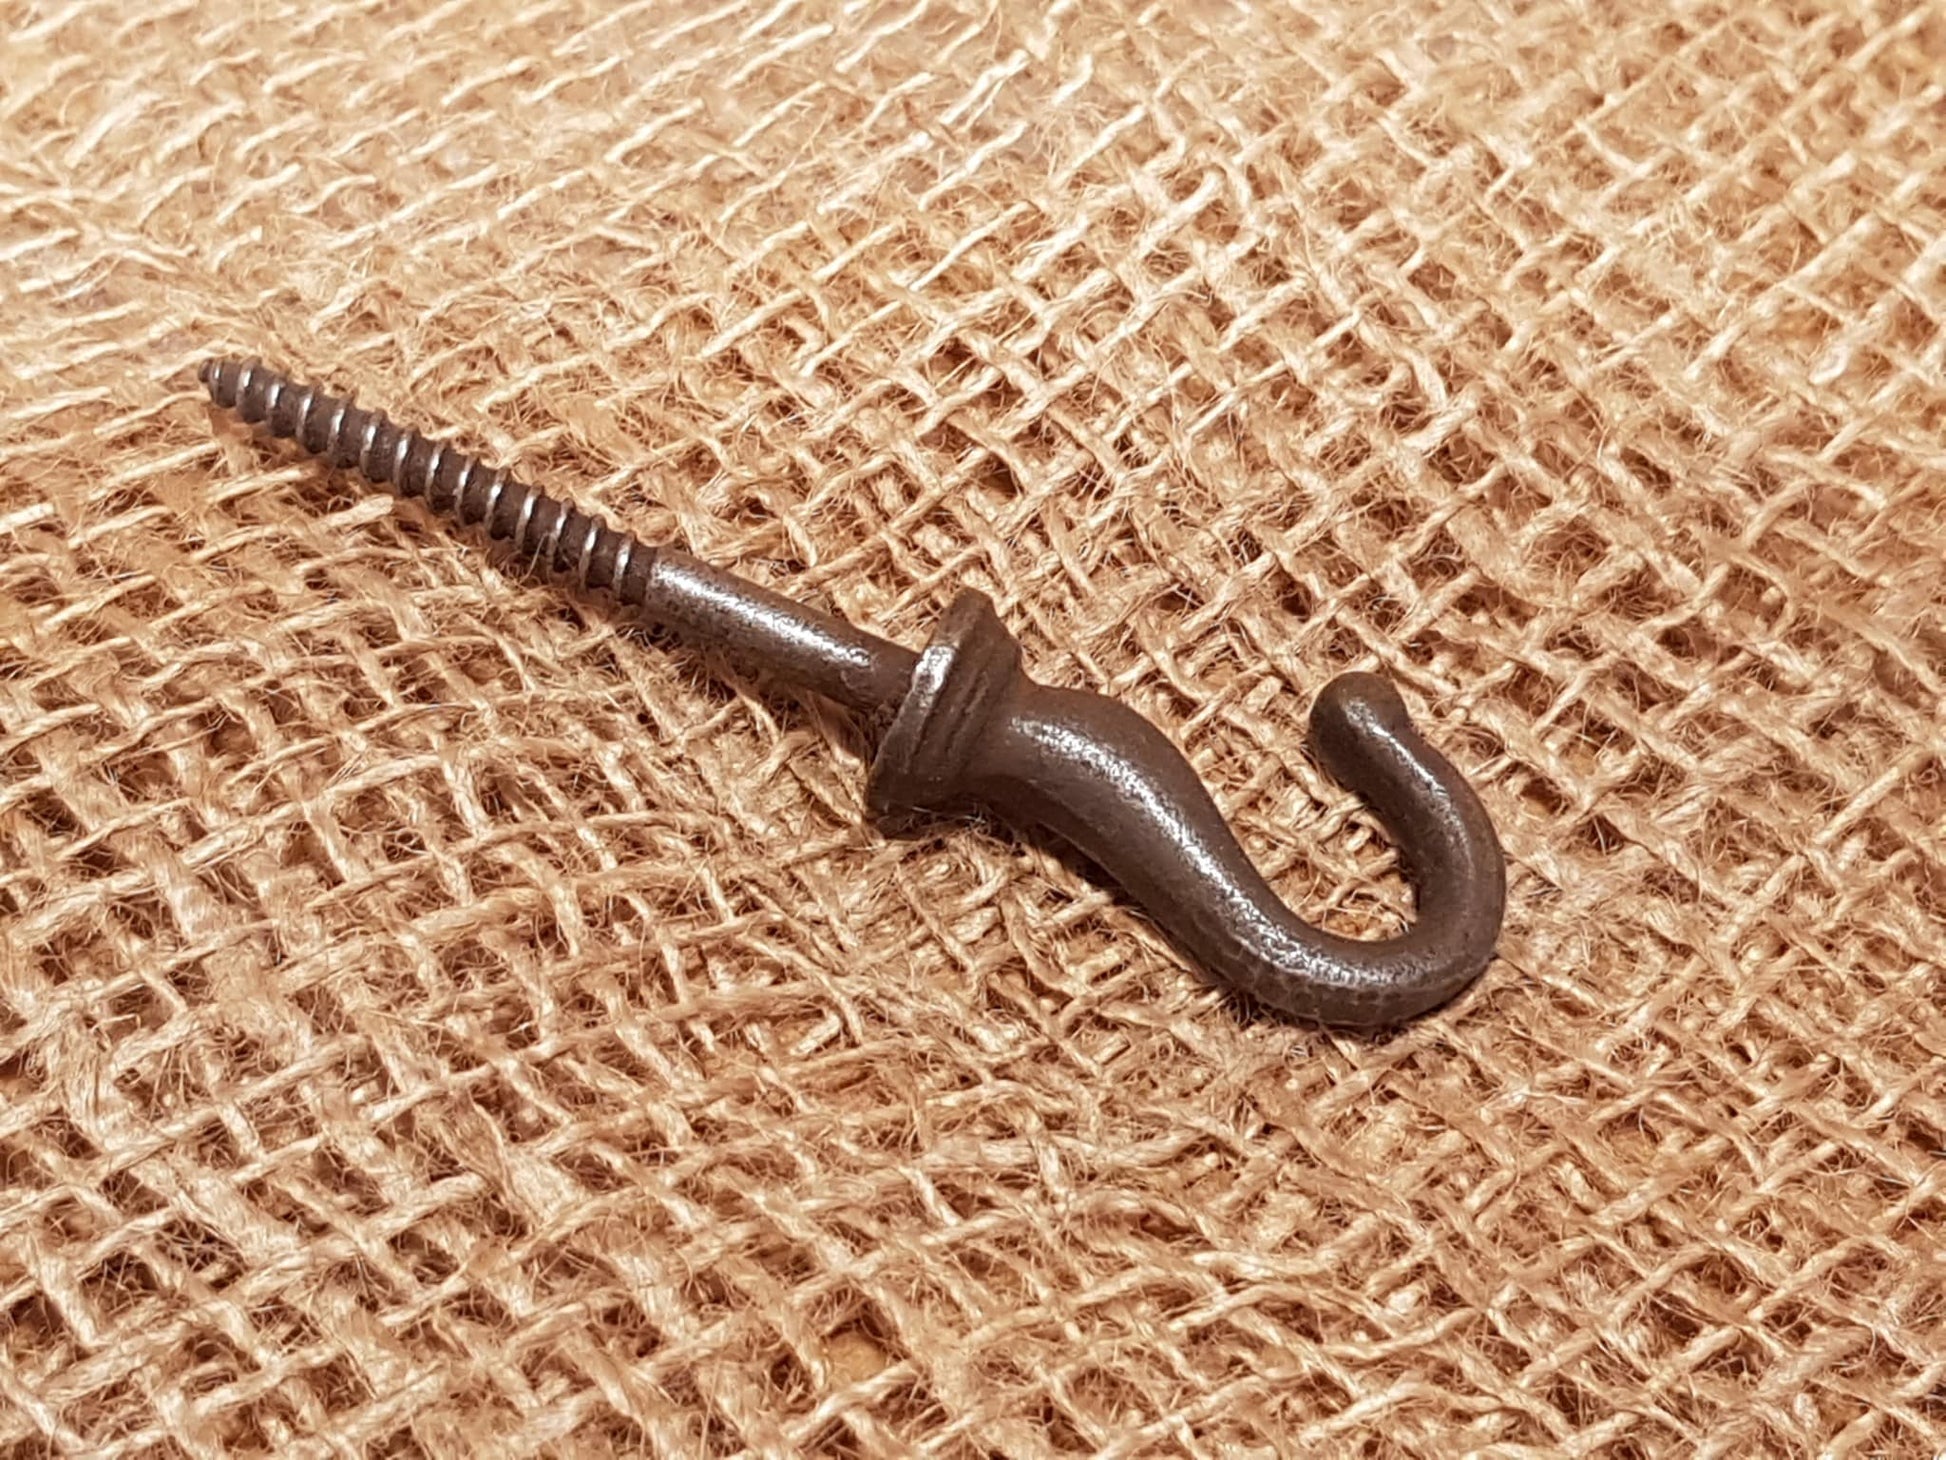 Screw-In Hook - Long Thread - Spearhead Collection - Single Hooks - Hooks, Single Hooks, Threaded Hook